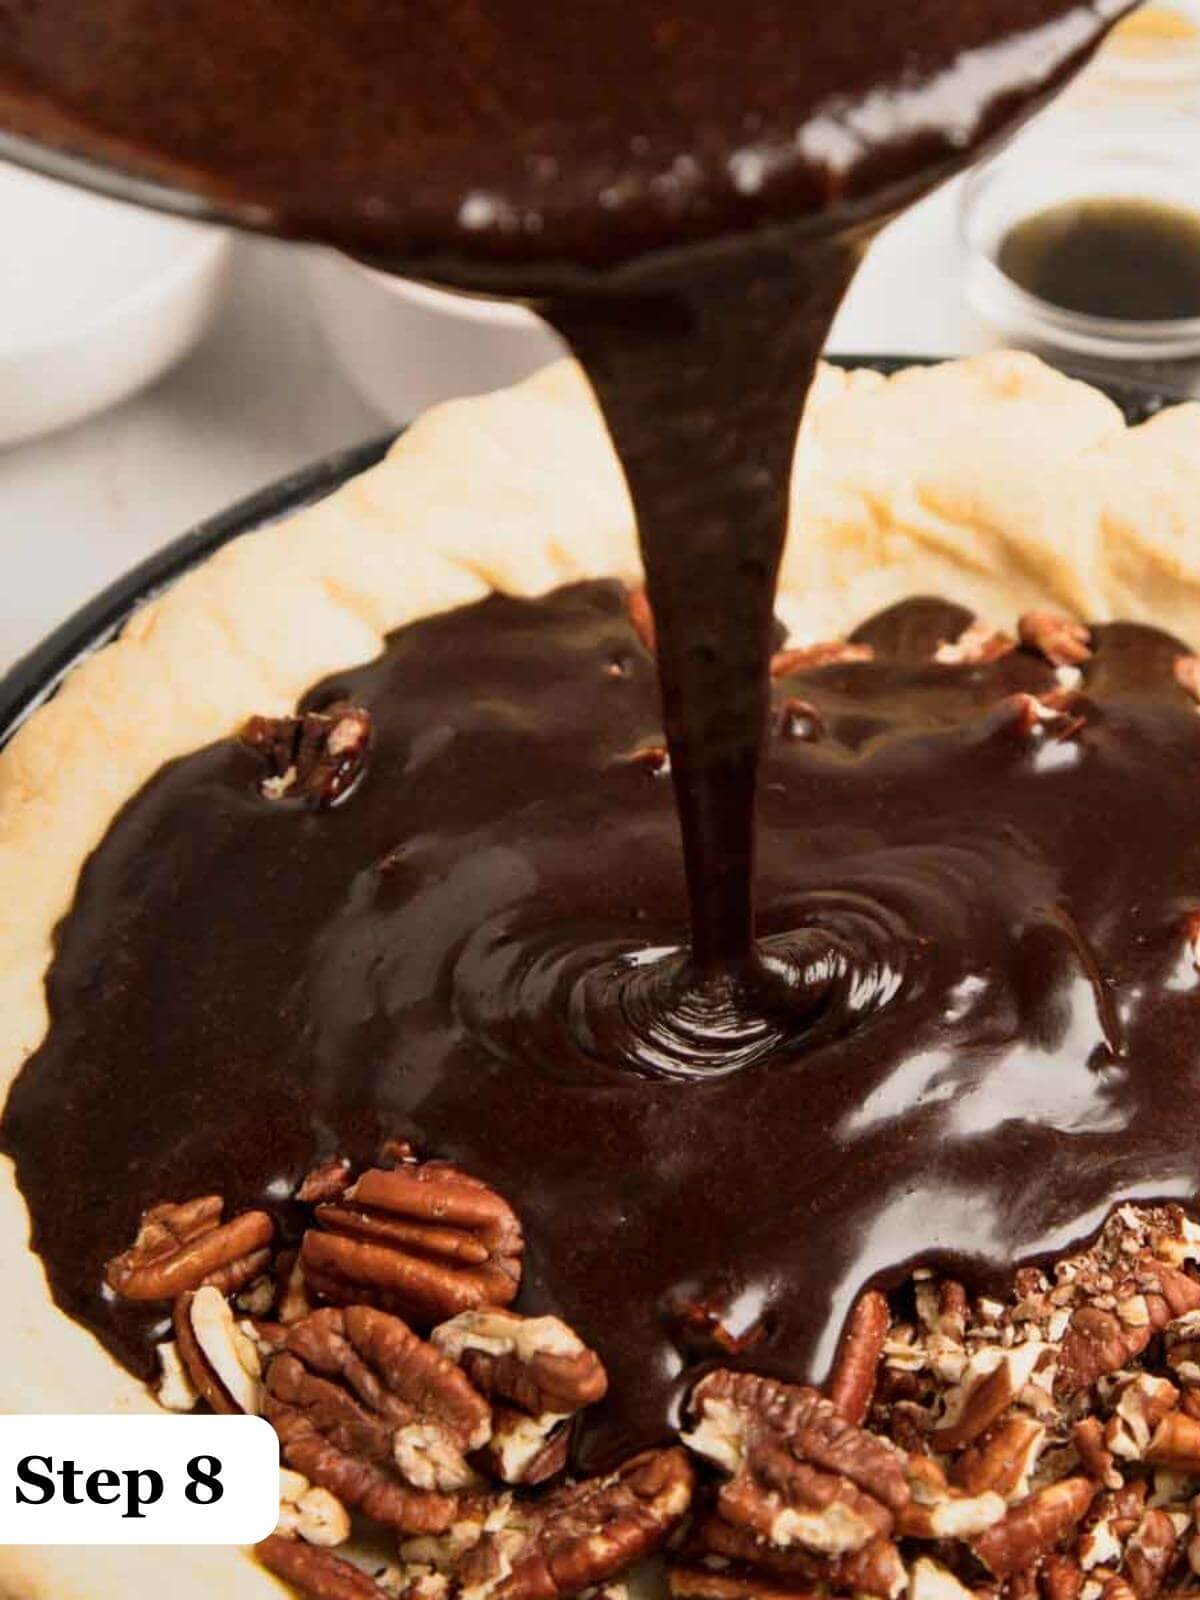 Text: Step 8, pouring chocolate pecan pie filling into a pie shell.